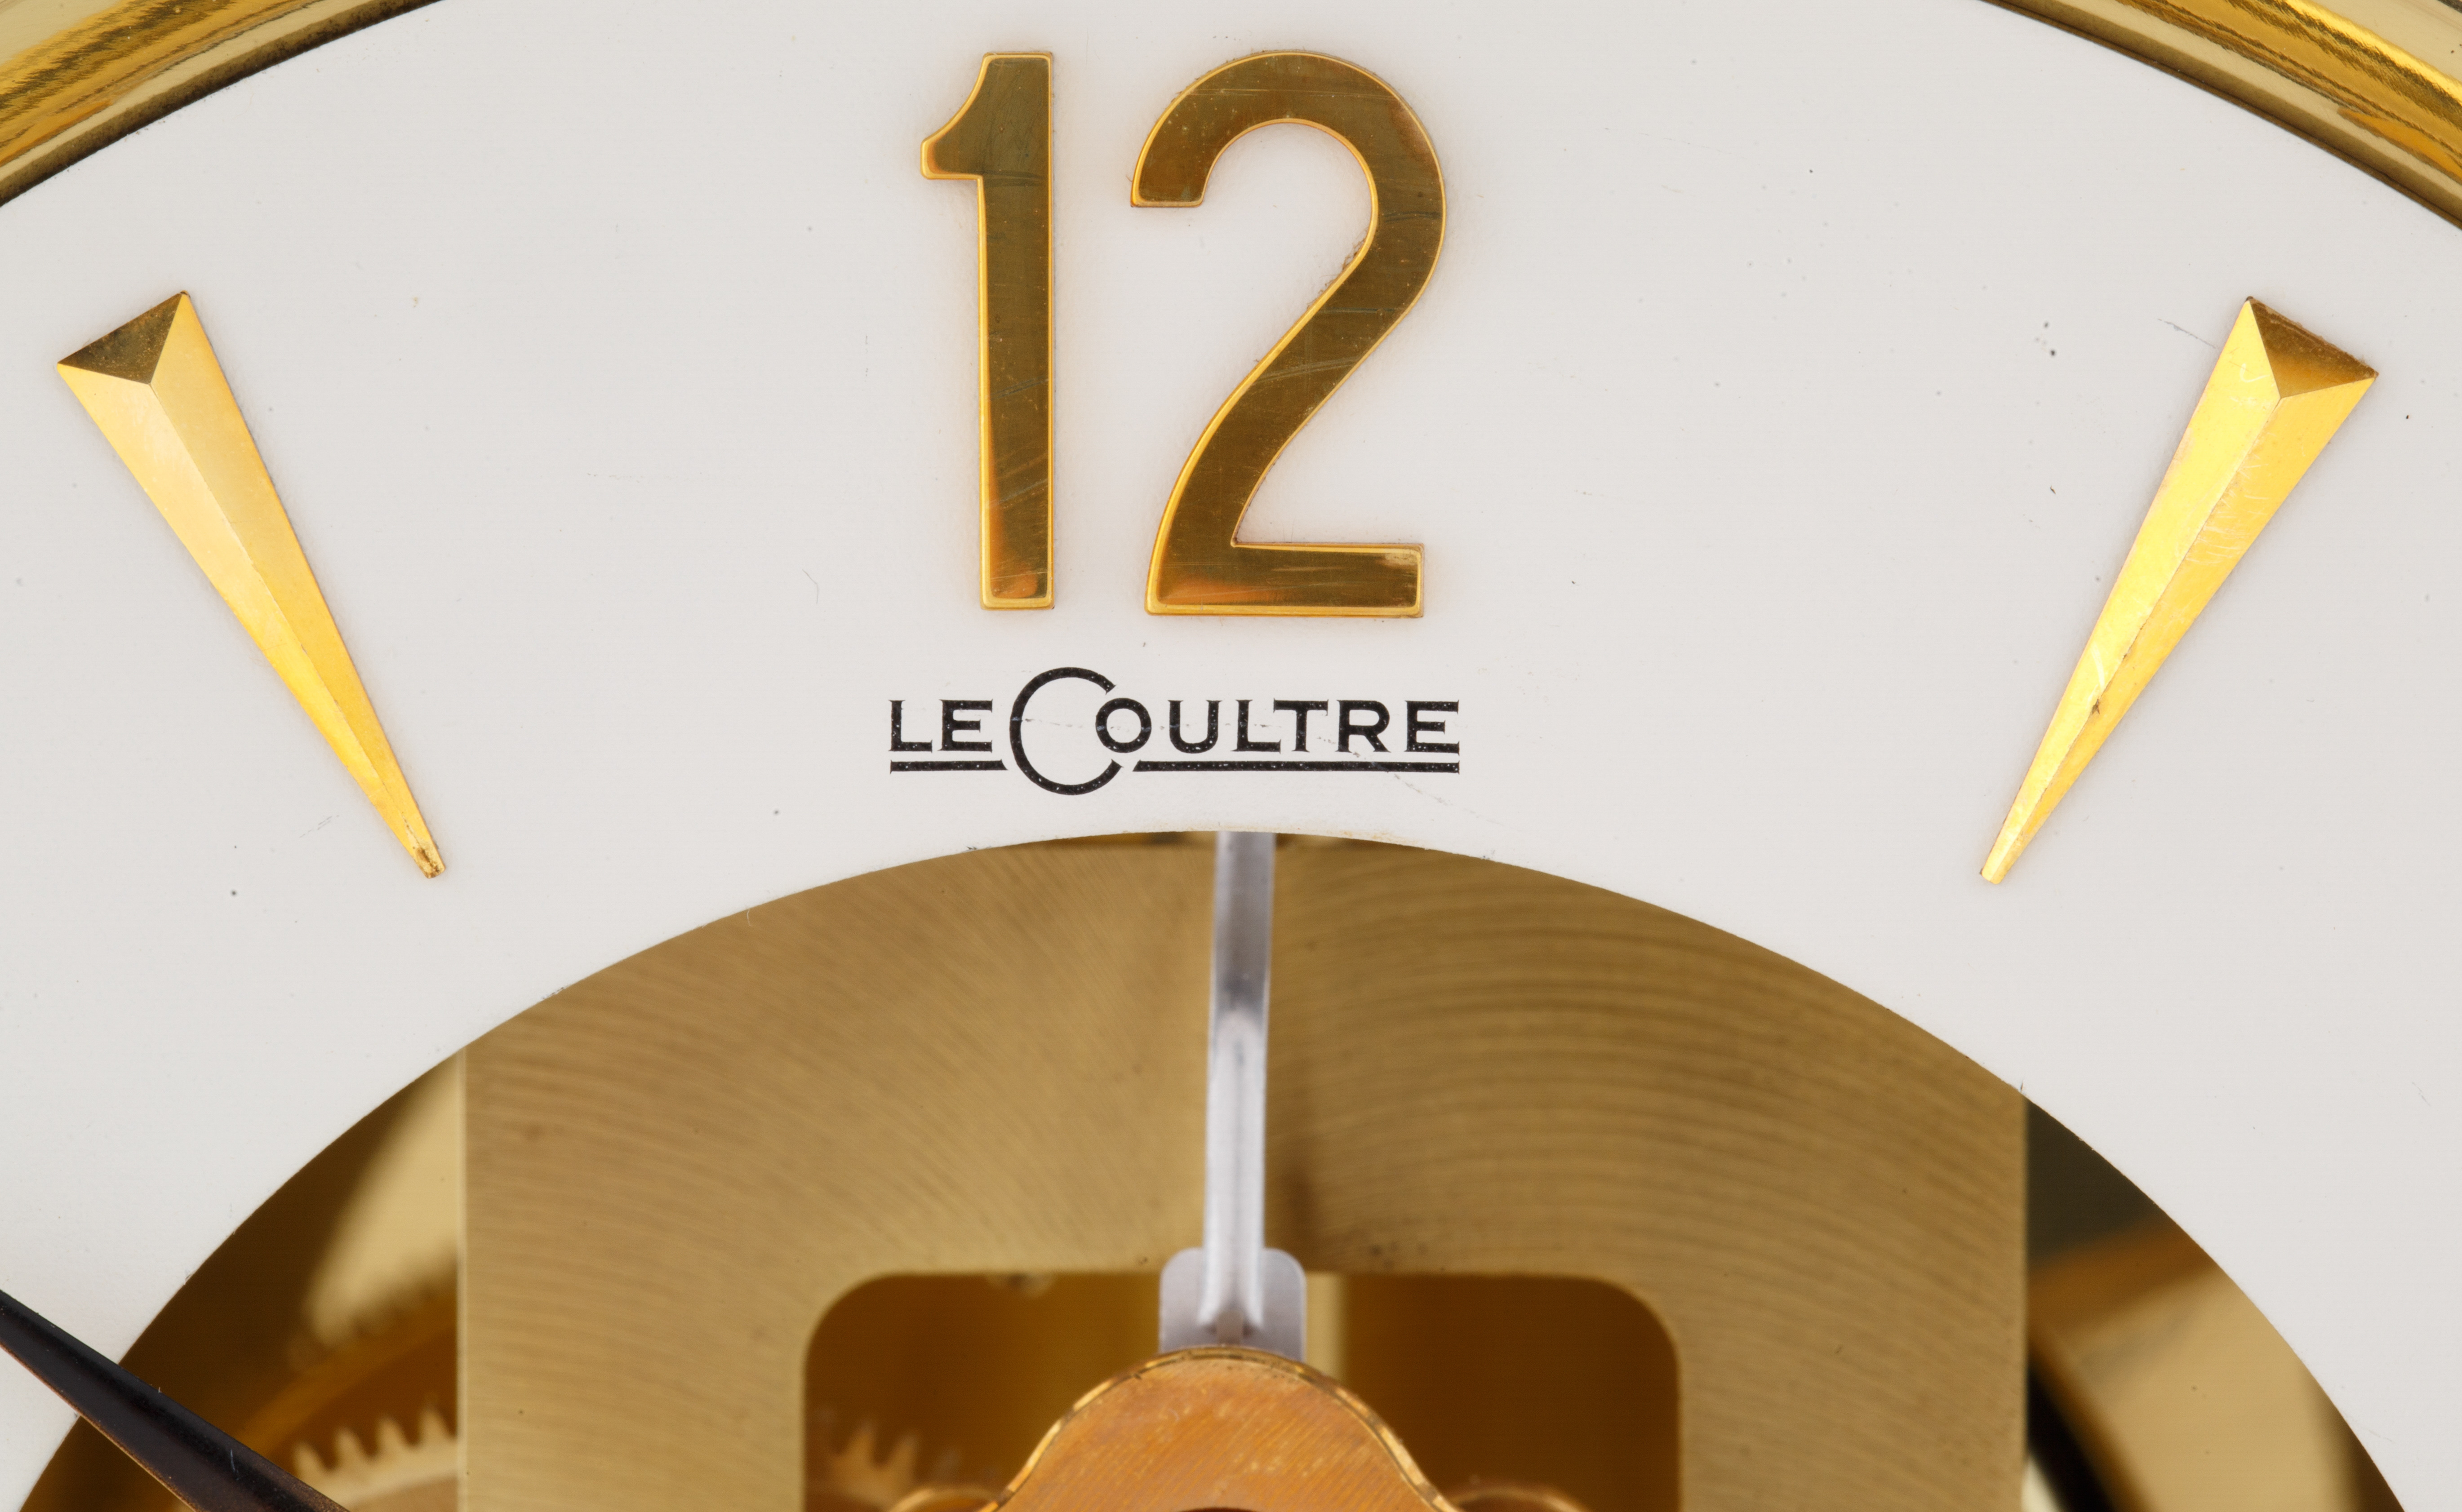 CLASSIC' LECOULTRE MANTLE CLOCK, ATMOS COLLECTION - Image 6 of 8